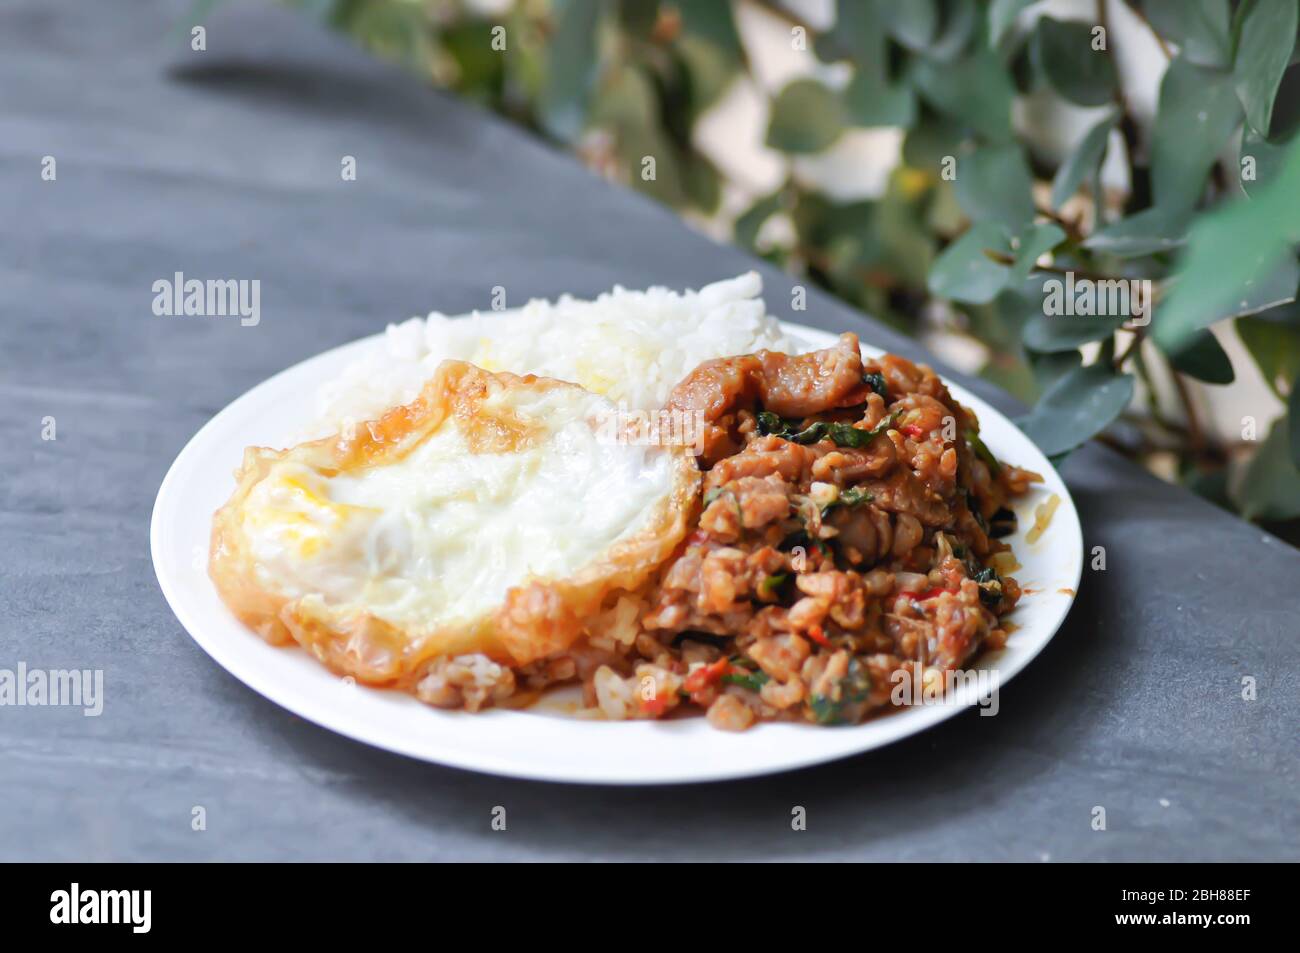 stir fried pork with chili paste, fried egg with rice dish Stock Photo